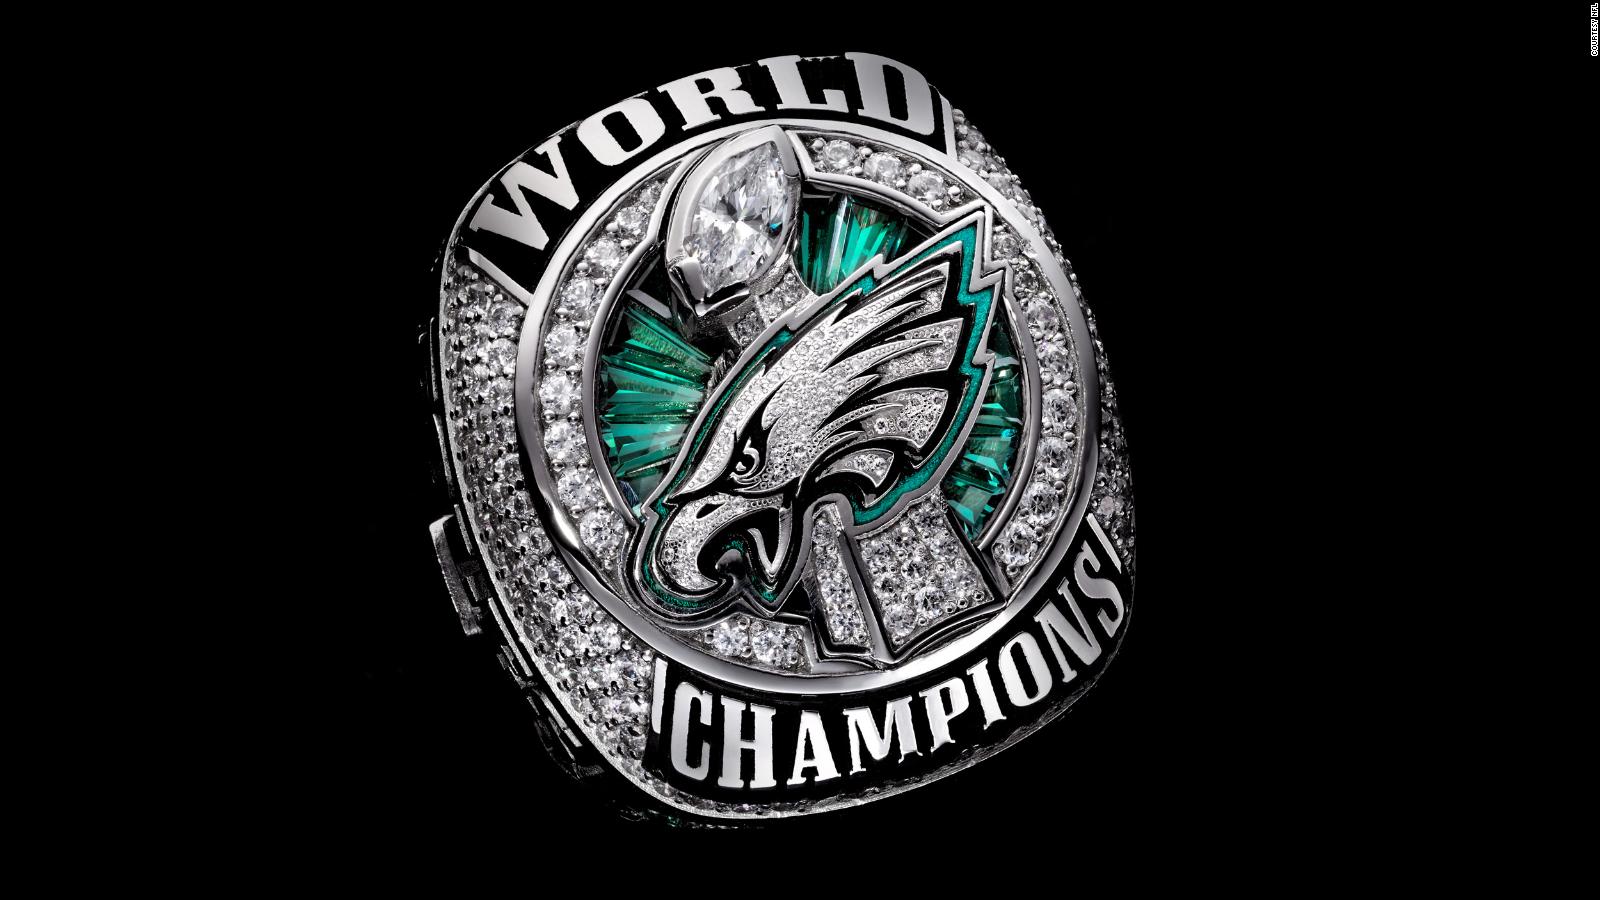 Super Bowl rings: Every ring design 